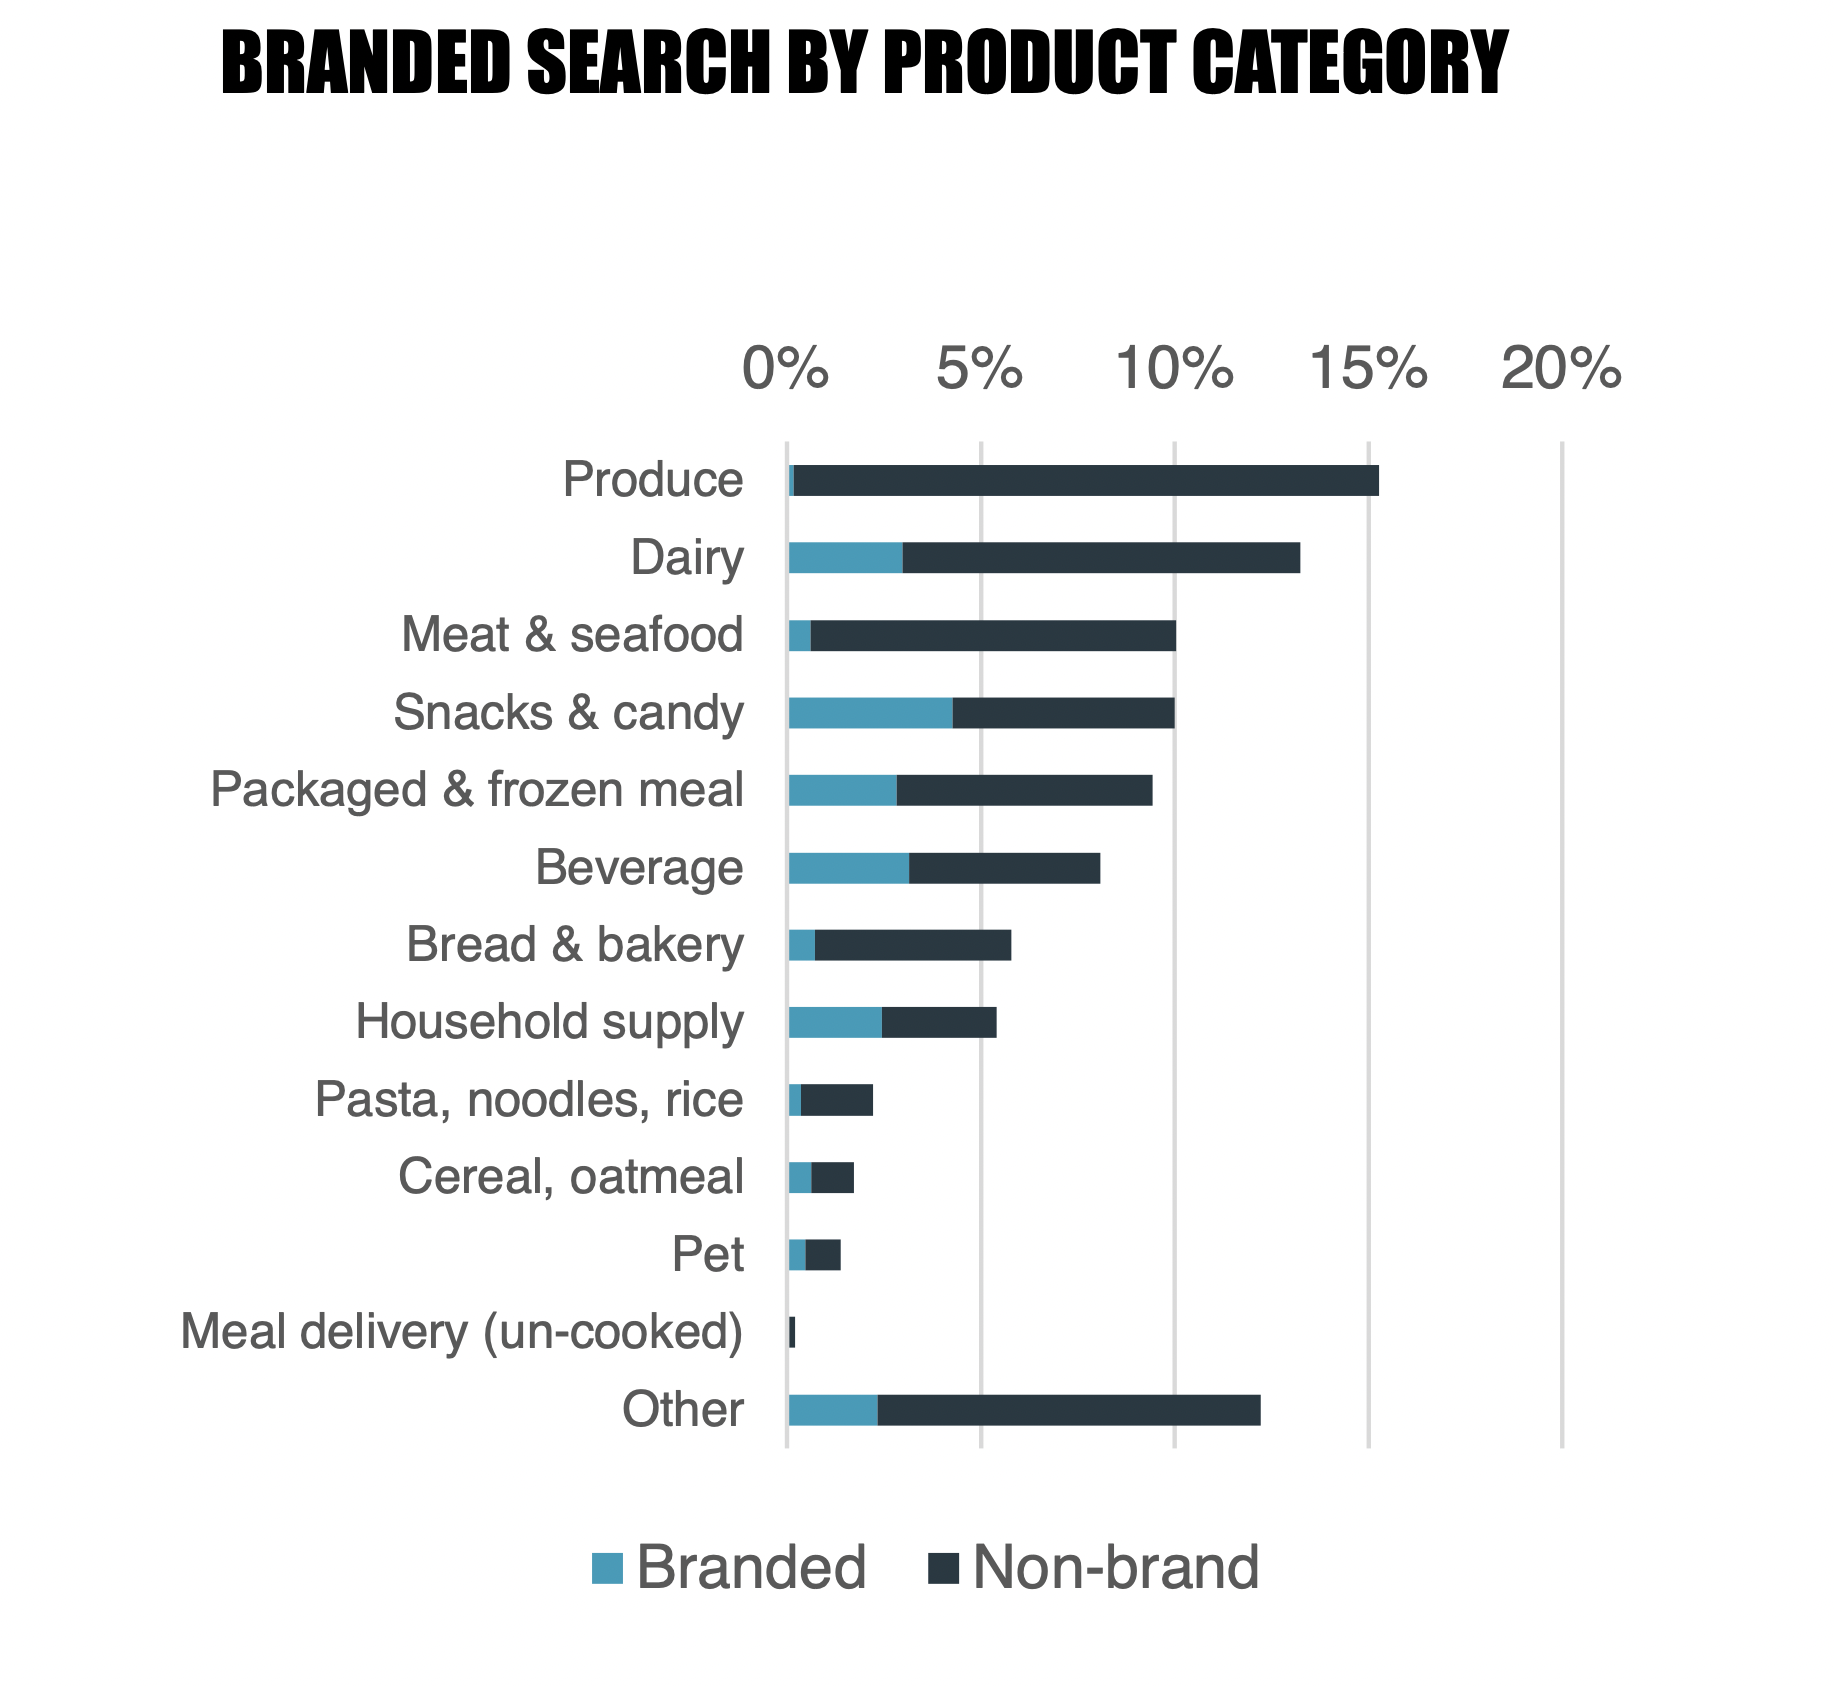 online grocery shopping case studies